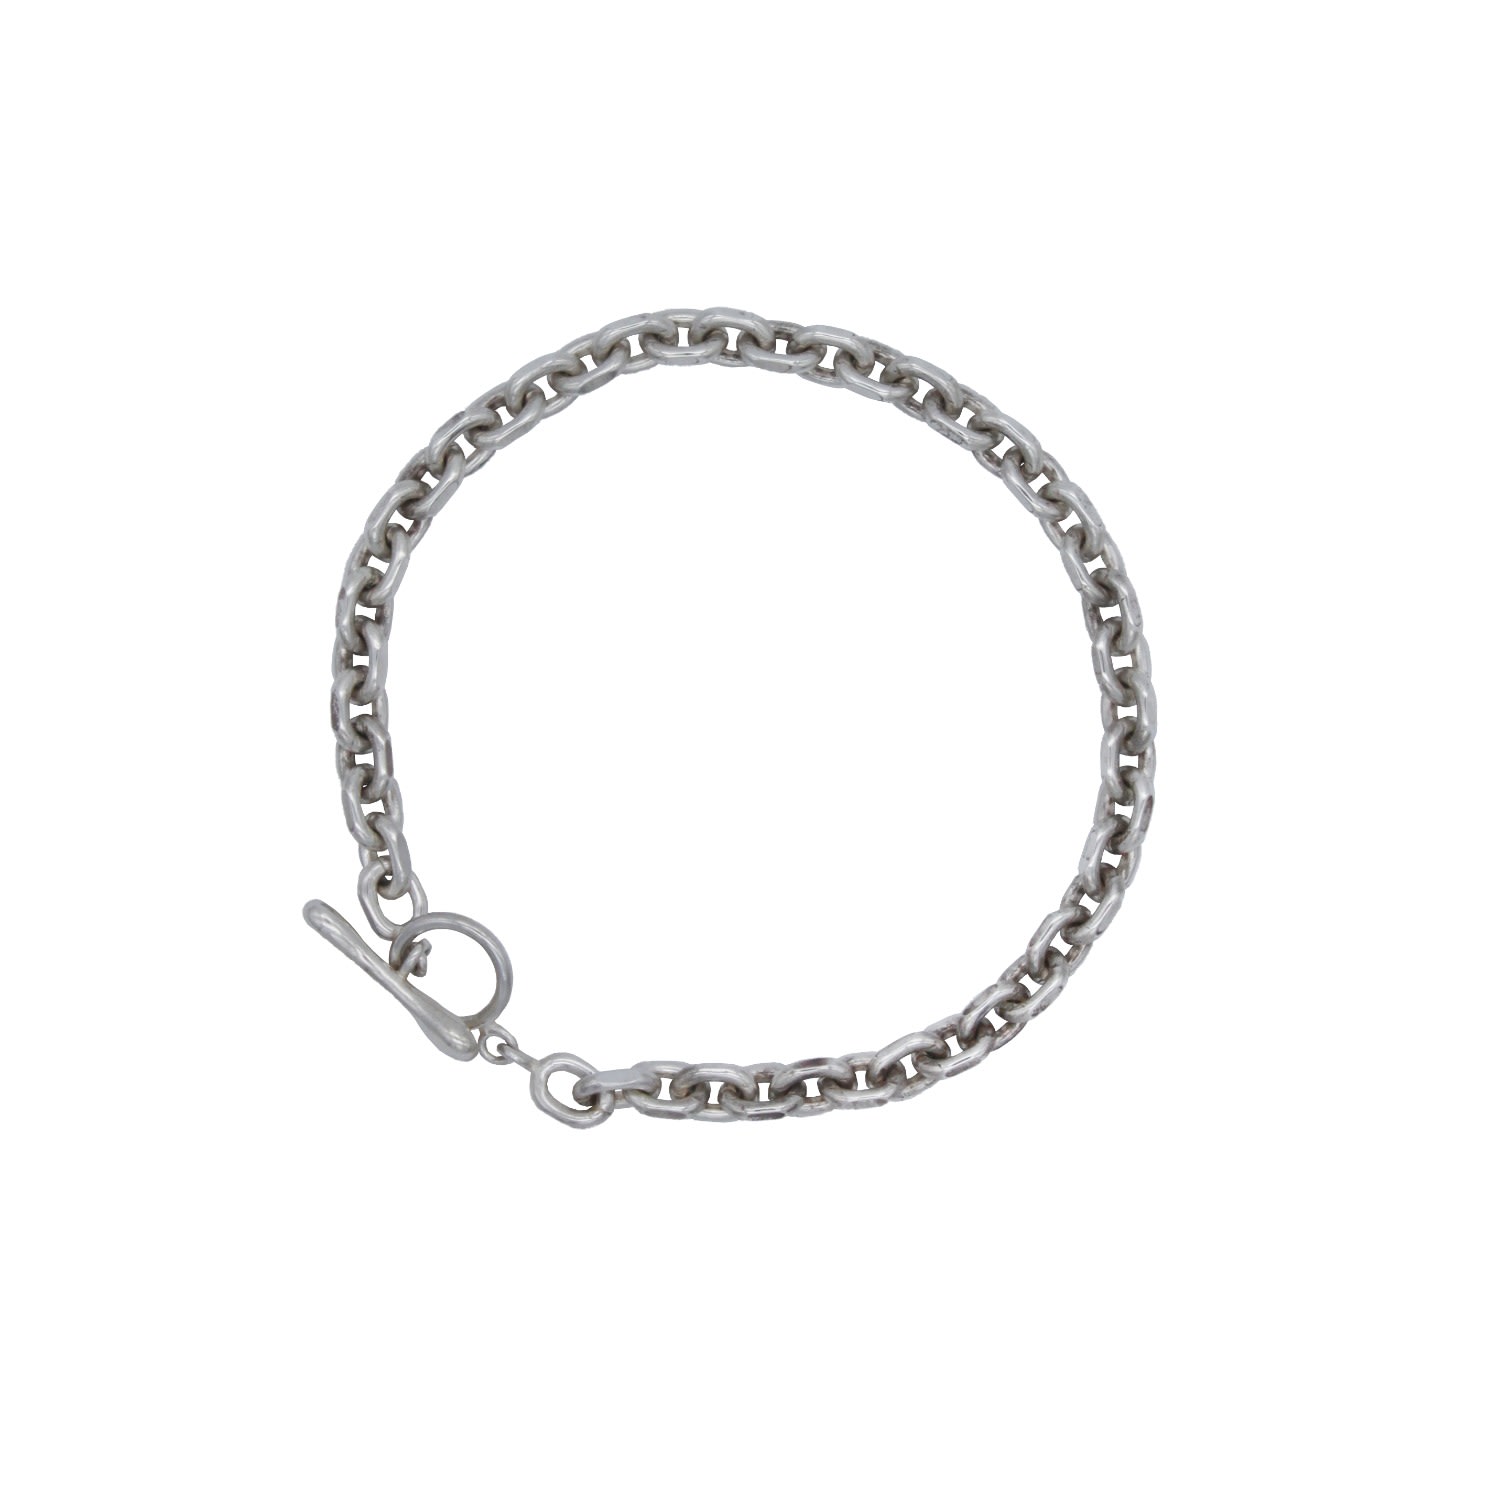 Women’s Silver Diamond Cut Chain Bracelet With Bone Clasp Iona Hindmarch Bisset